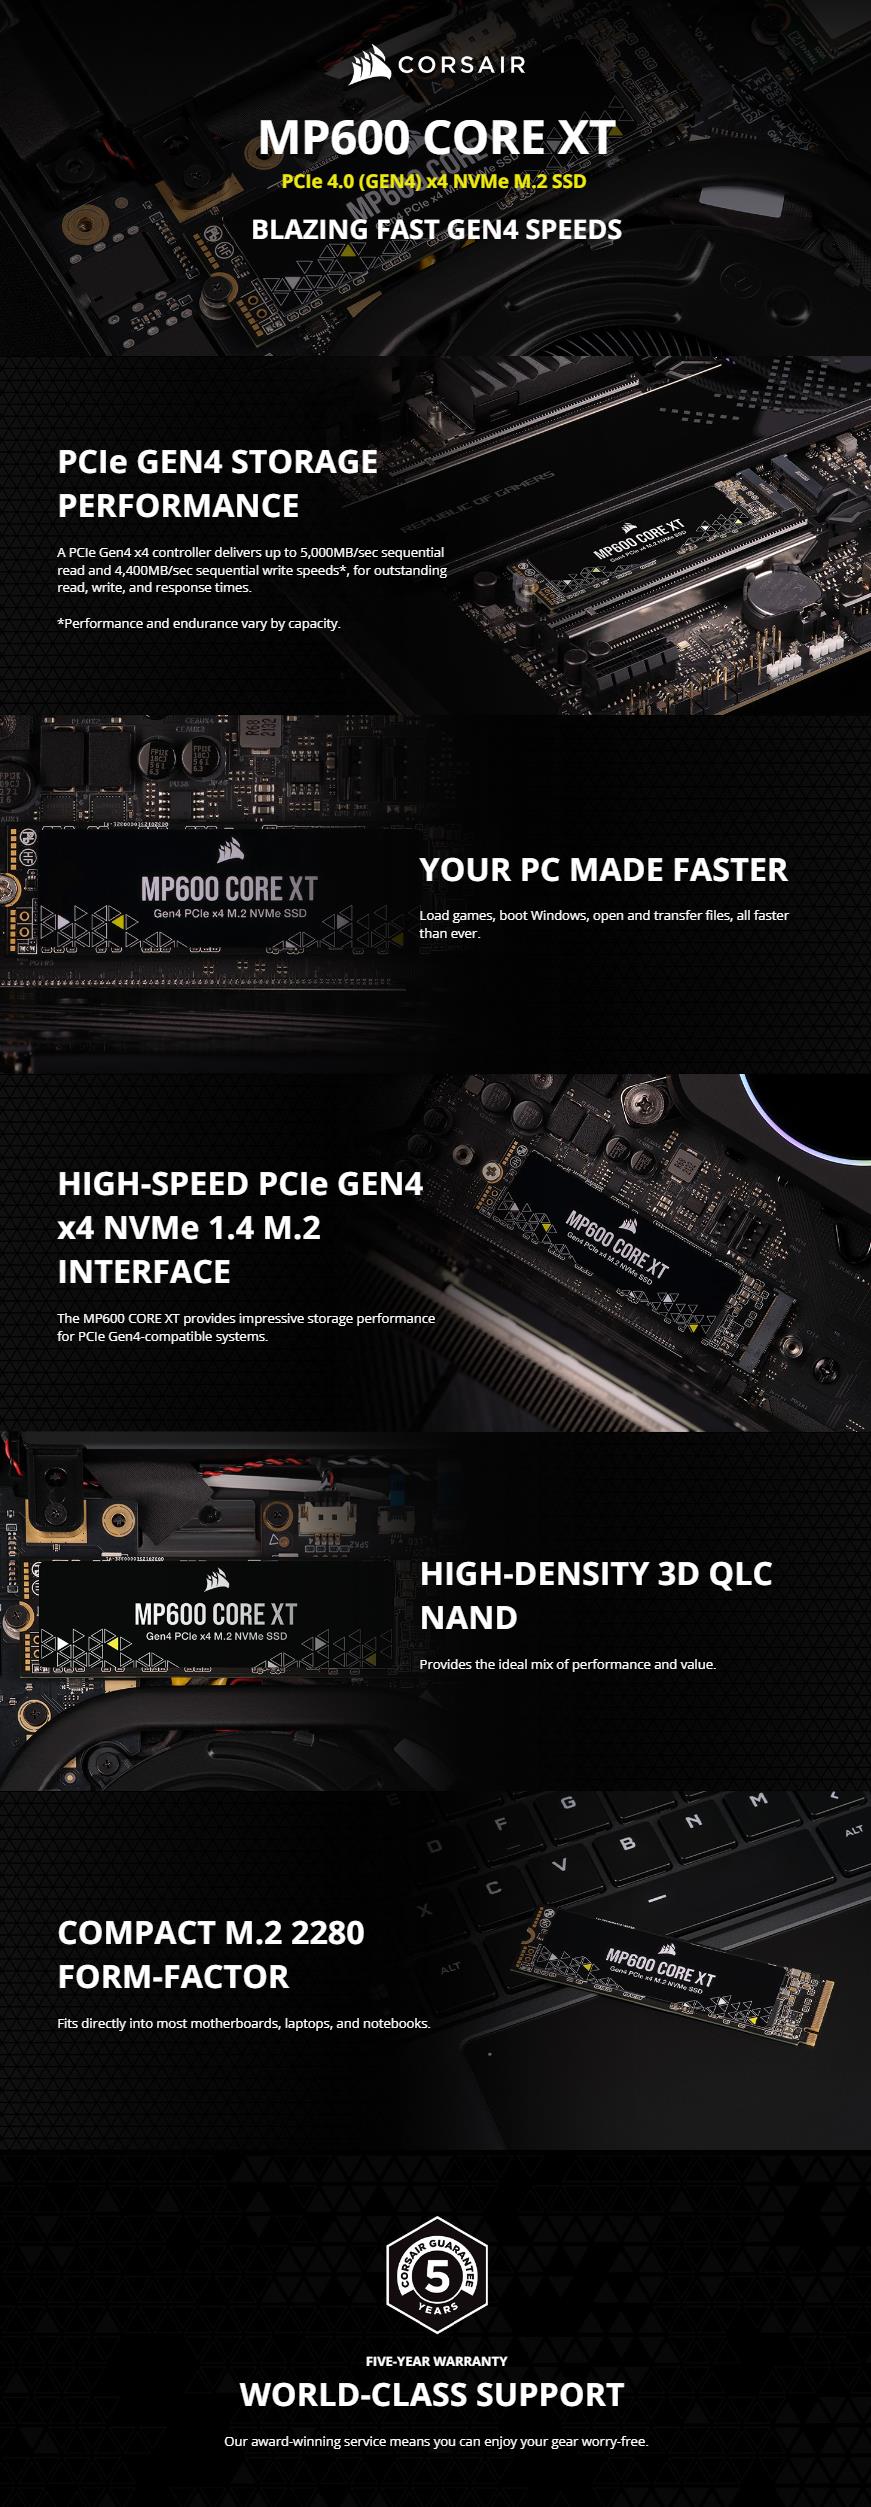 A large marketing image providing additional information about the product Corsair MP600 CORE XT PCIe Gen4 NVMe M.2 SSD - 1TB - Additional alt info not provided